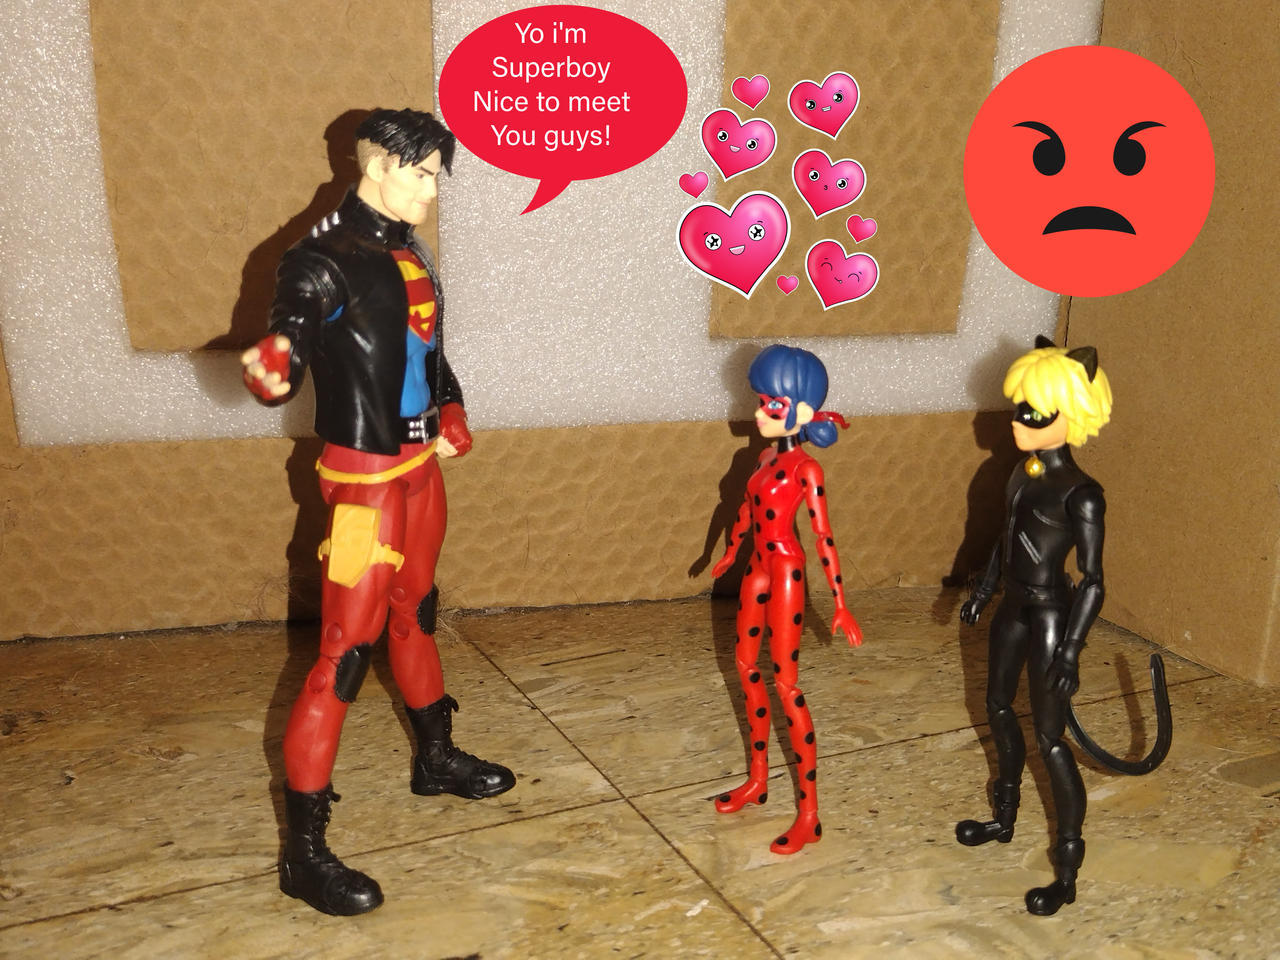 Cat Noir and Ladybug VS Shadybug and Claw Noir by D1g1m0ncrazy on DeviantArt